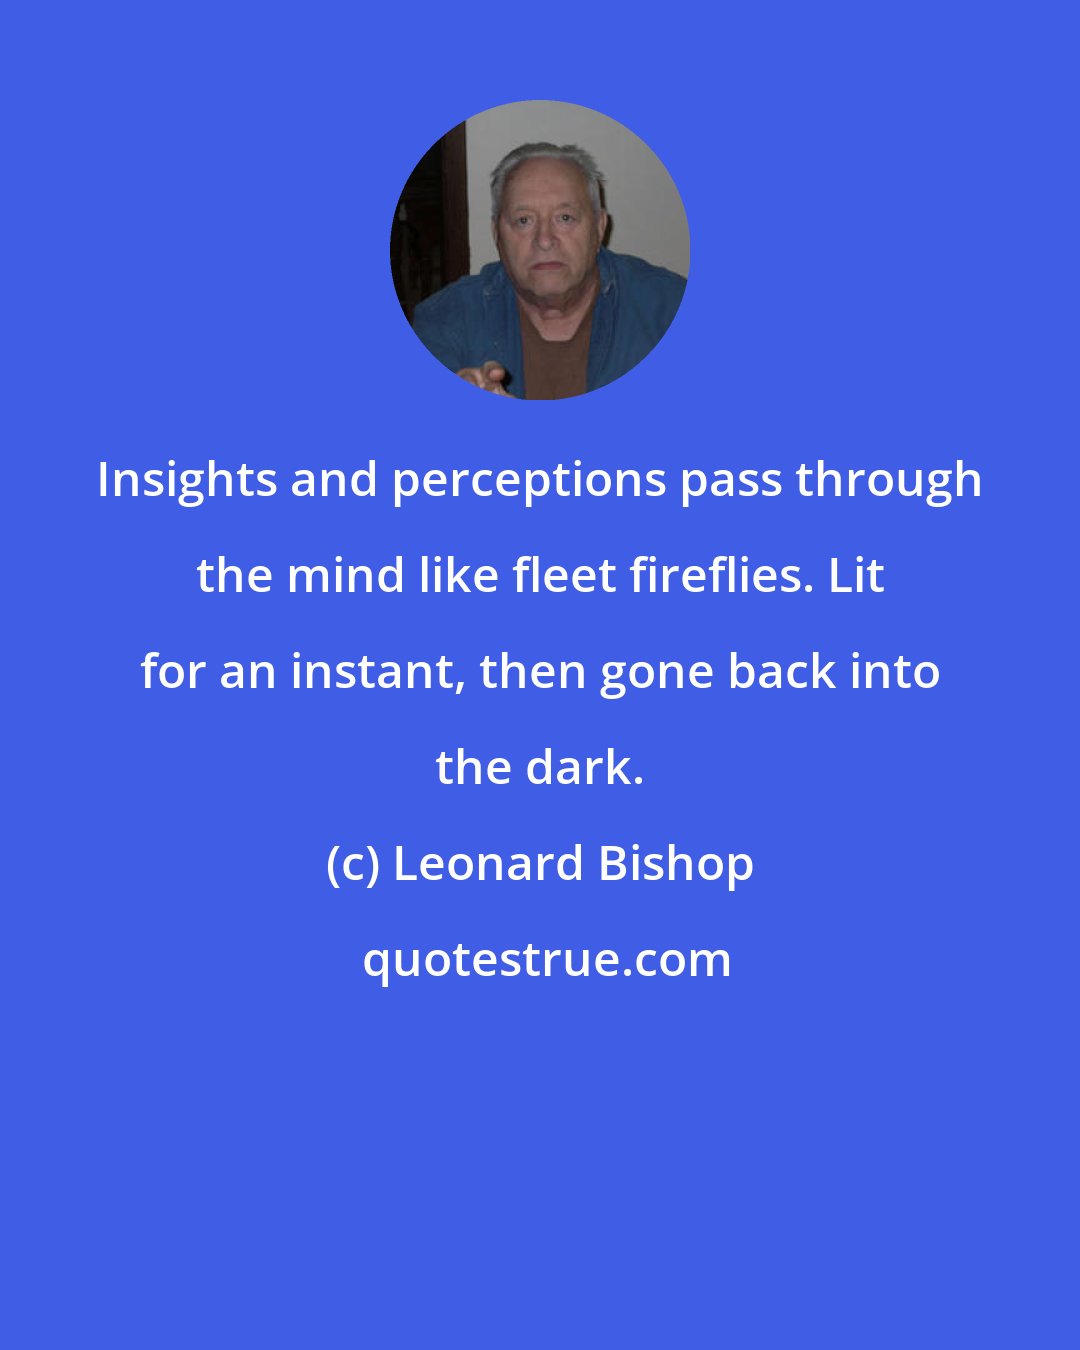 Leonard Bishop: Insights and perceptions pass through the mind like fleet fireflies. Lit for an instant, then gone back into the dark.